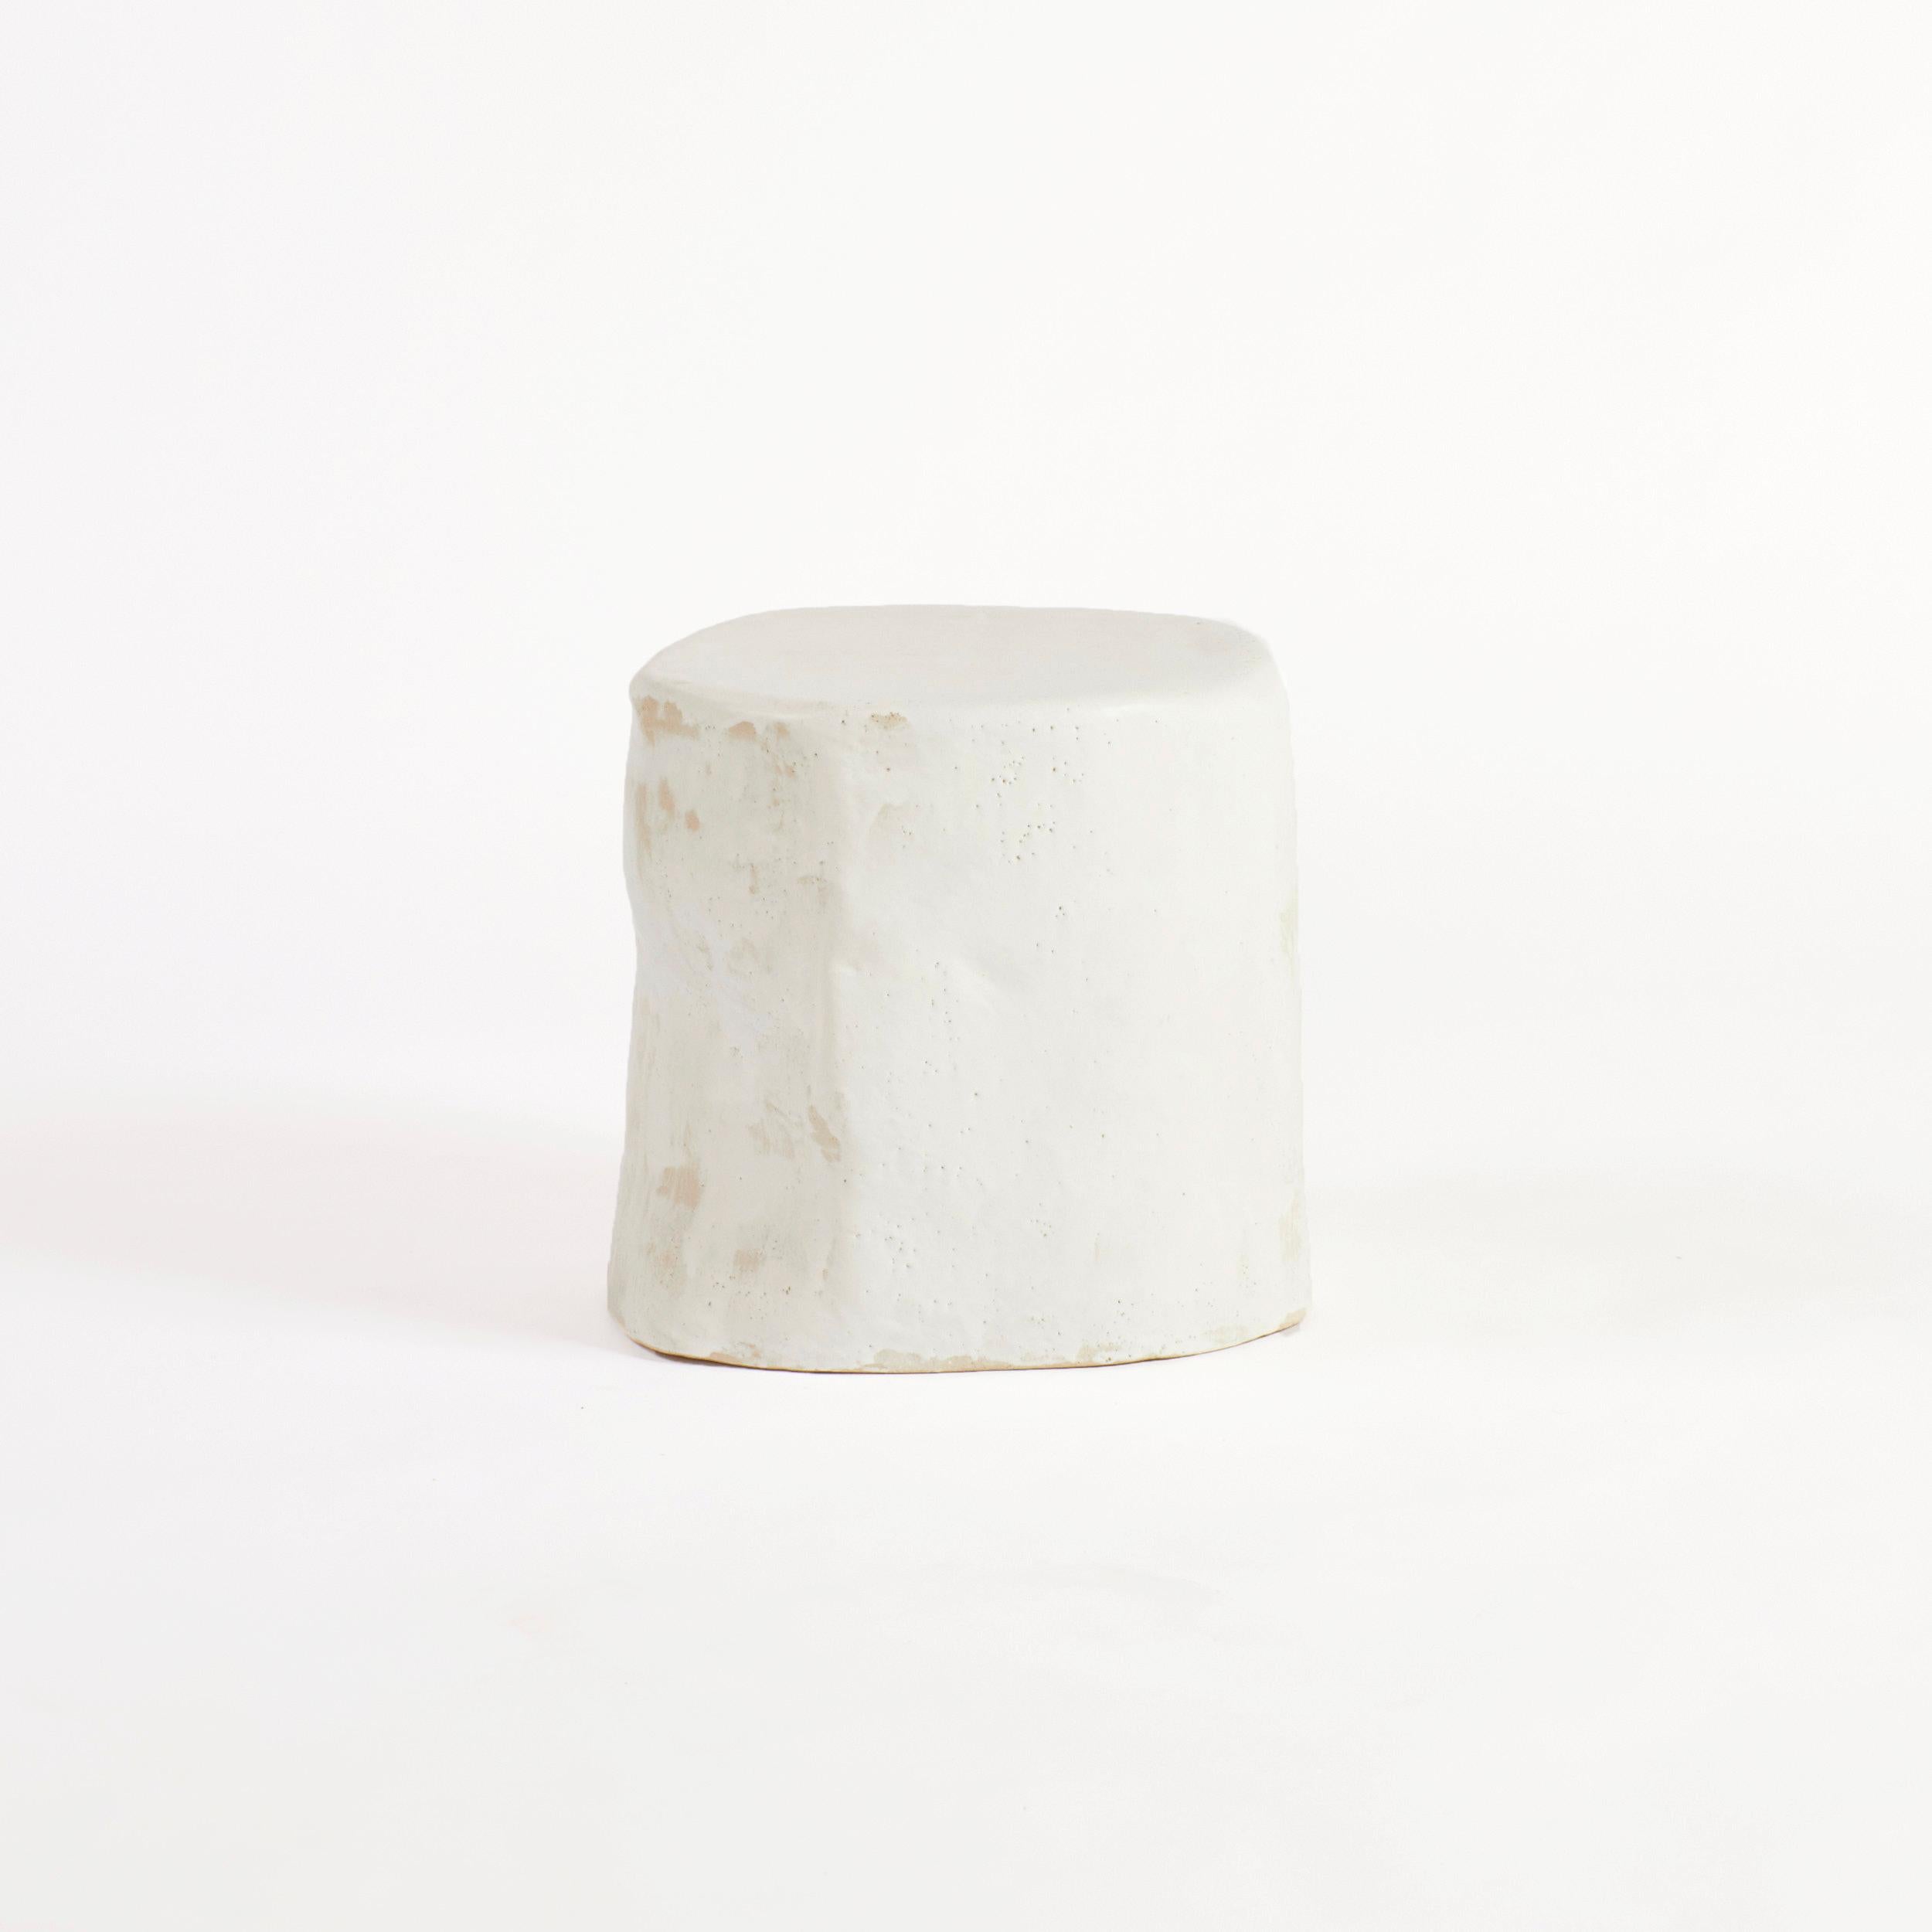 Medium Ceramic Side Table by Project 213A
Dimensions: W38 x D38 x H44 cm
Materials: Ceramic

The artisanal ceramic side tables have been created in-house and are a result of exploring traditional shapes with a playful twist on proportions and